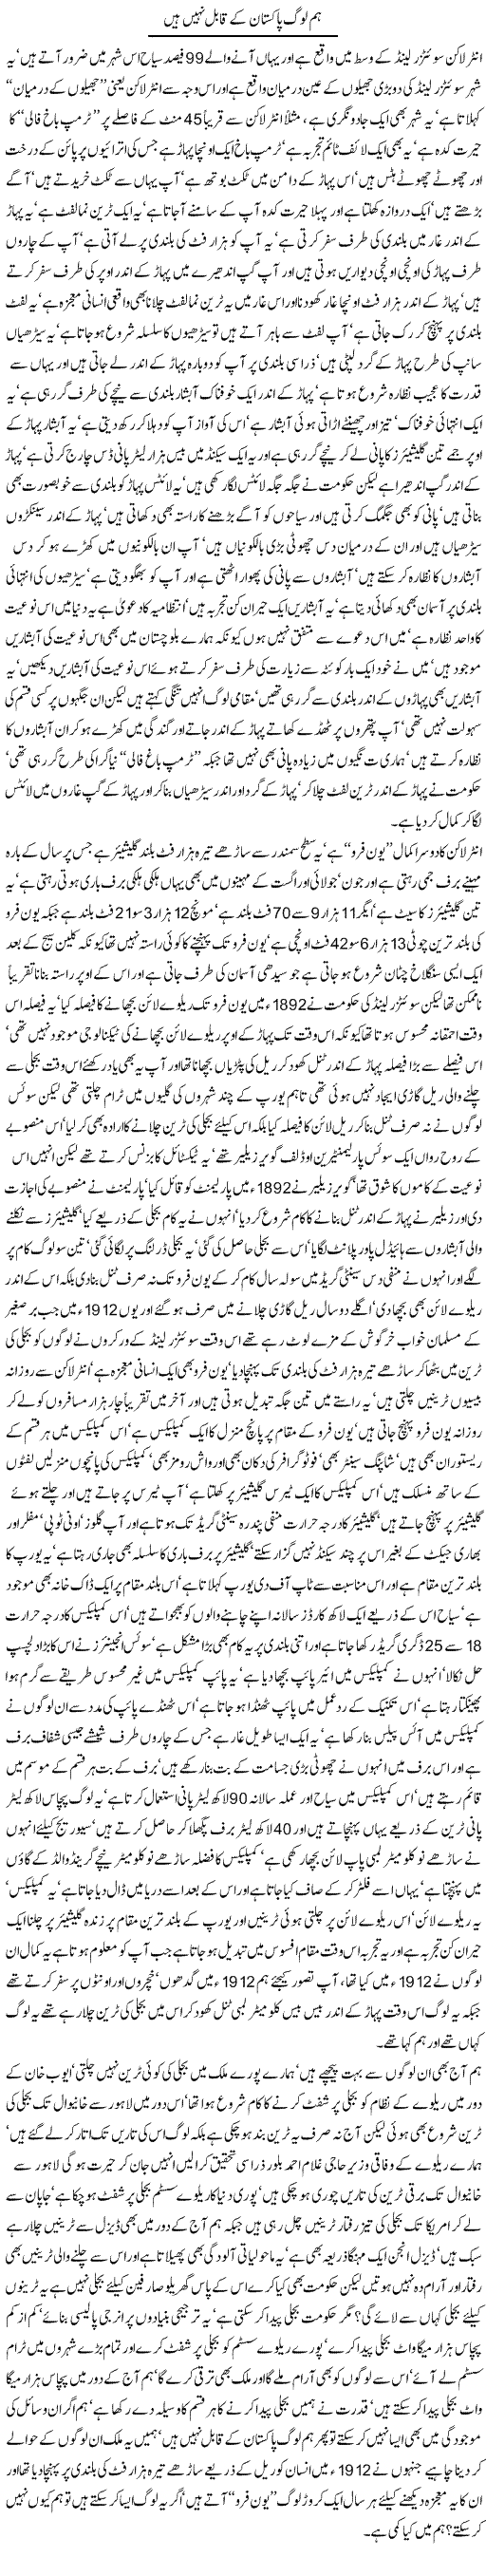 Pakistan and Us Express Column Javed Chaudhry 17 July 2011